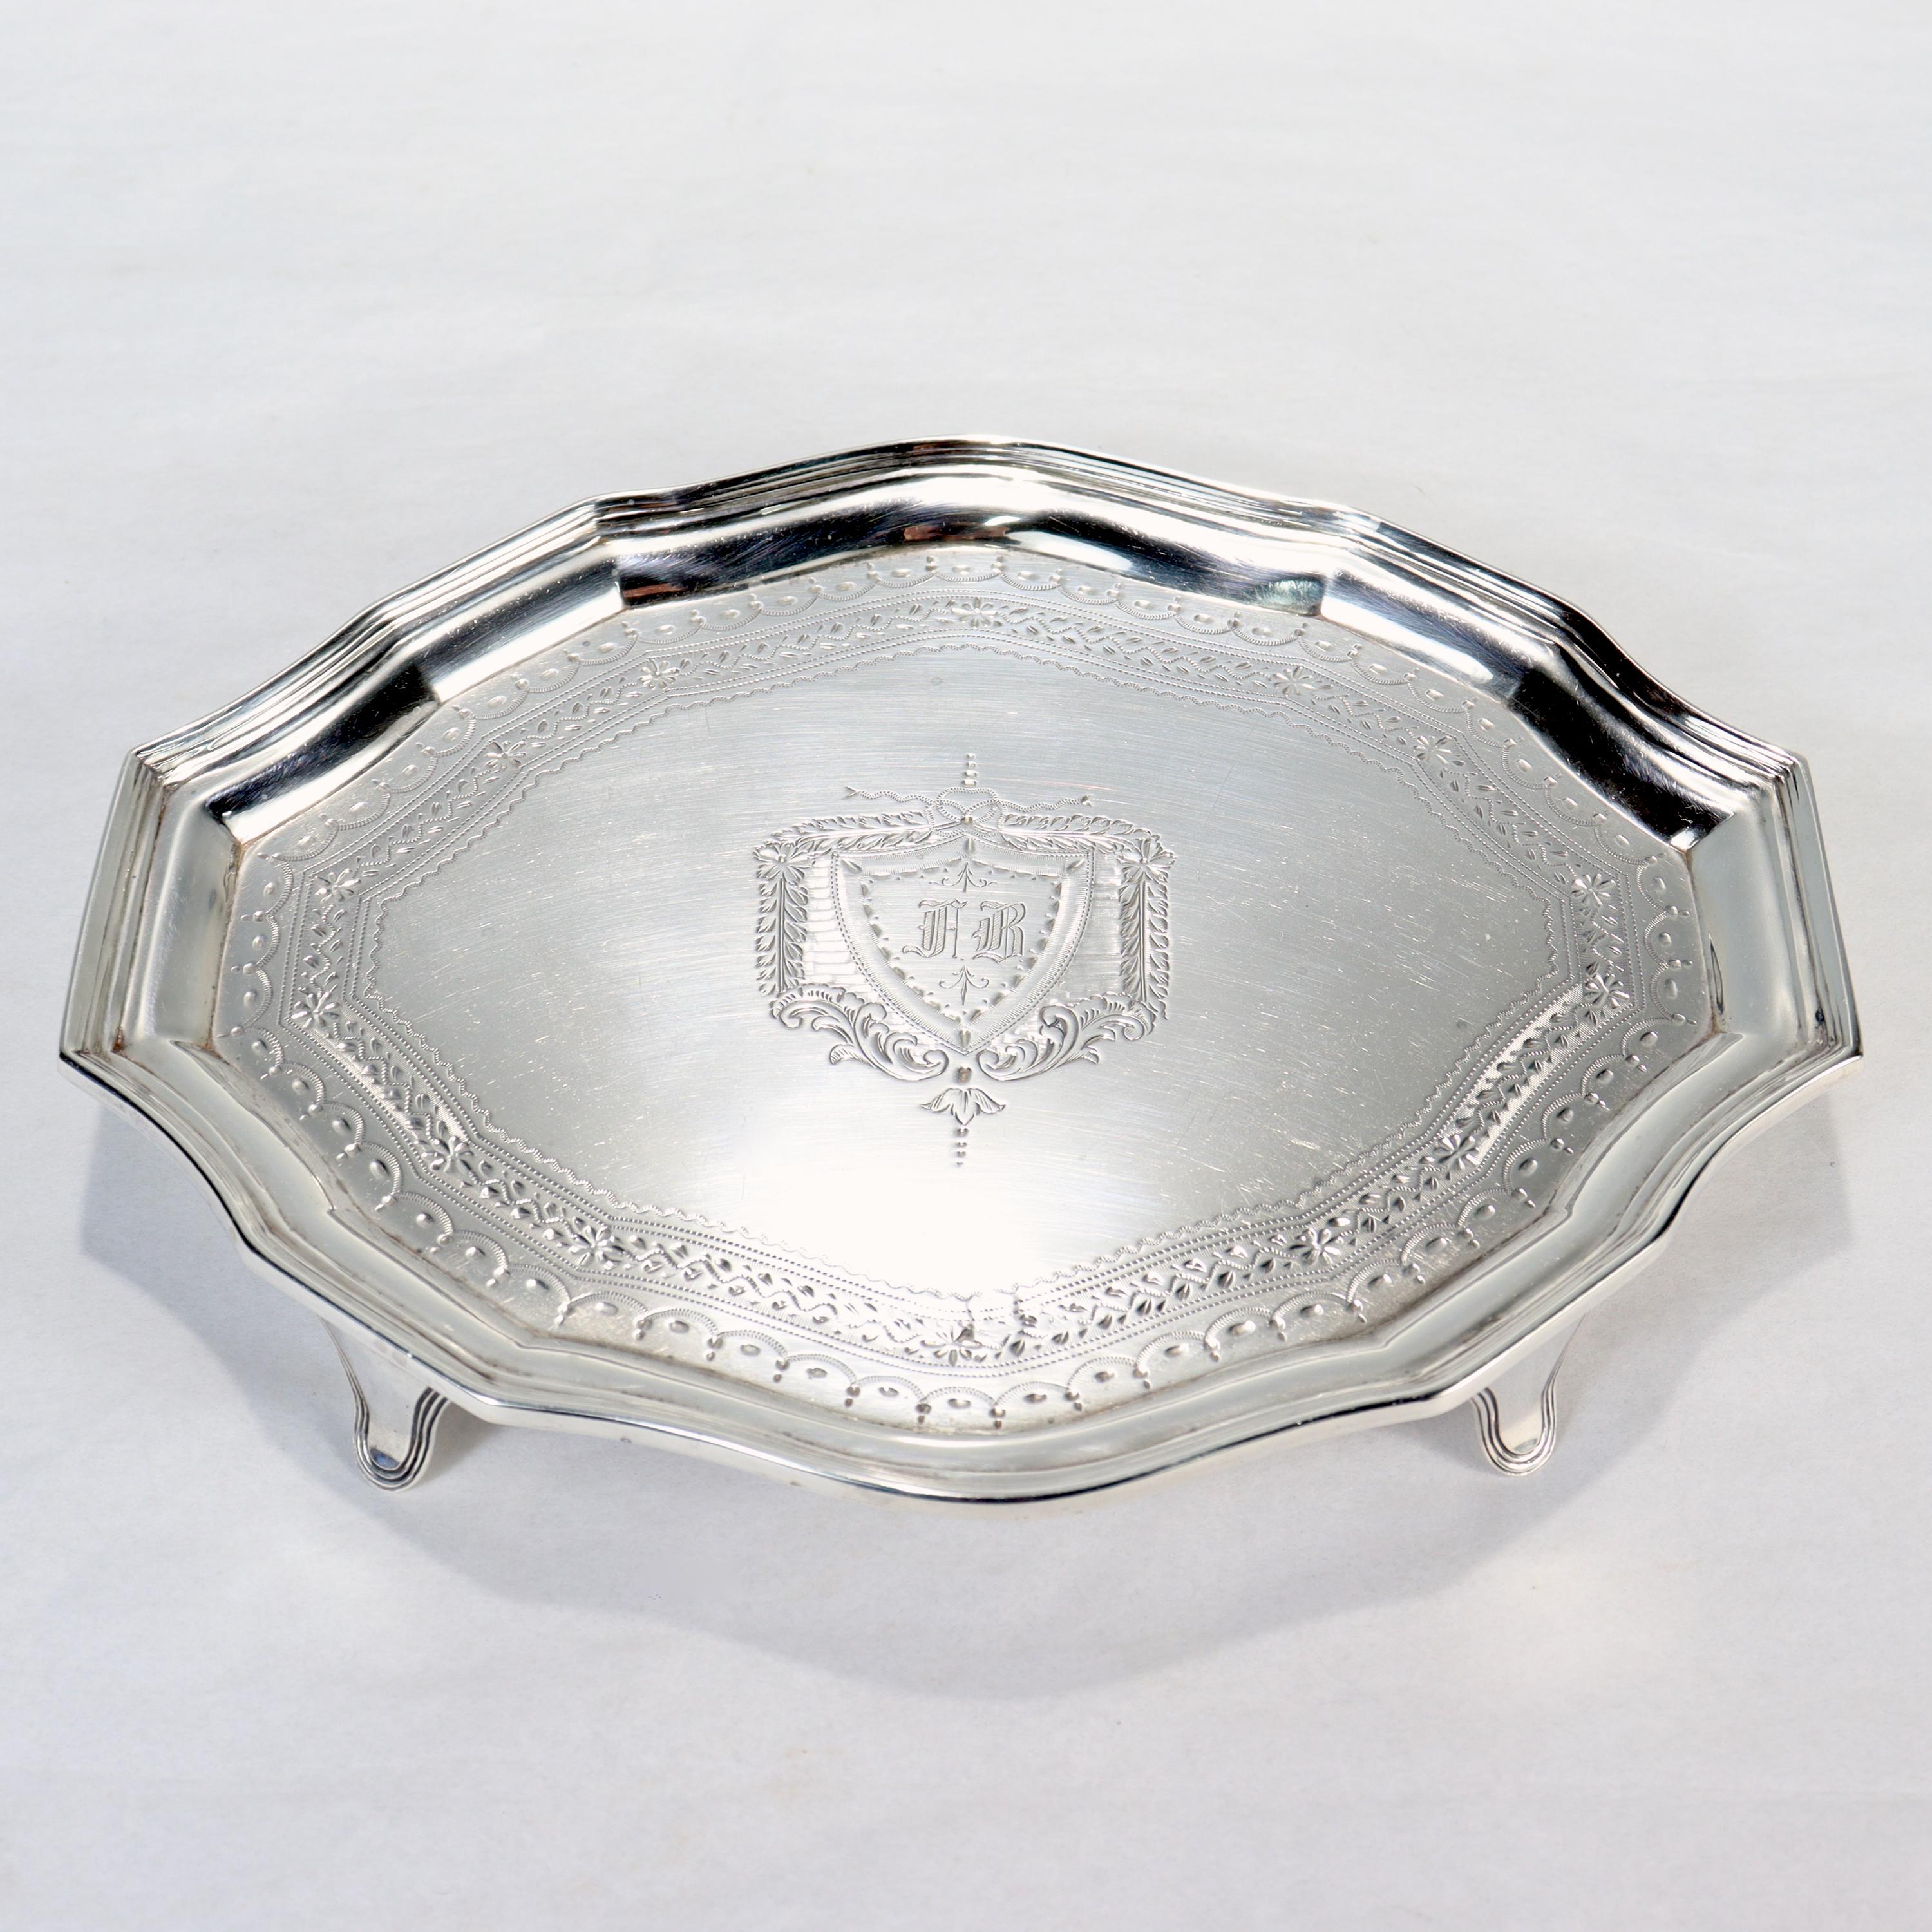 A fine 18th century Georgian sterling silver salver.

Supported by tab feet with a shaped top. 

With engraved decoration including a shield shaped cartouche at its center with a monogram. 

Simply a great Georgian style silver